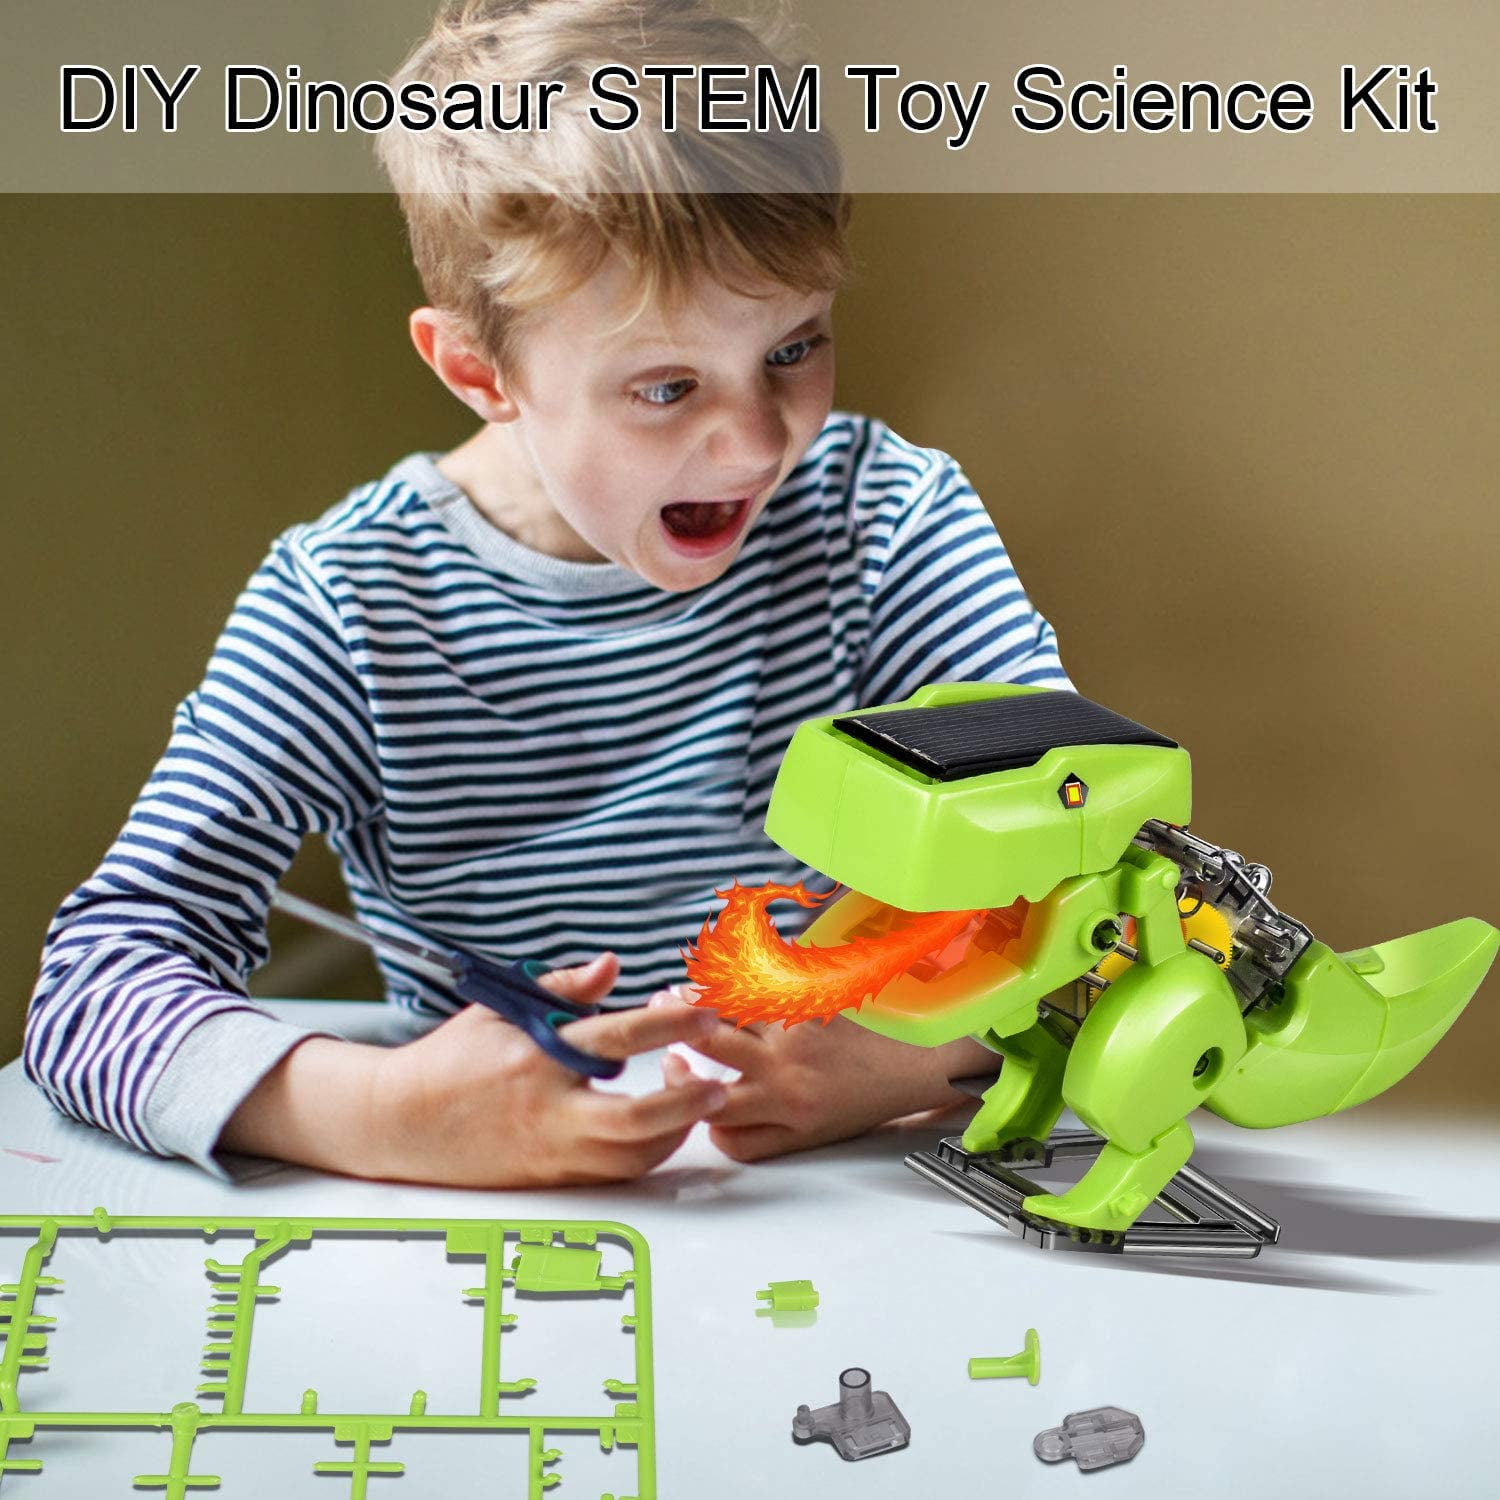  4 Pack Dinosaur Toys for Kids 8-12, STEM Kit, Boys Toys Age 8-10,  3D Wooden Puzzle Model Robotic Kits, Educational Science Building Projects  Crafts, Gifts for Boys and Girls 8 9